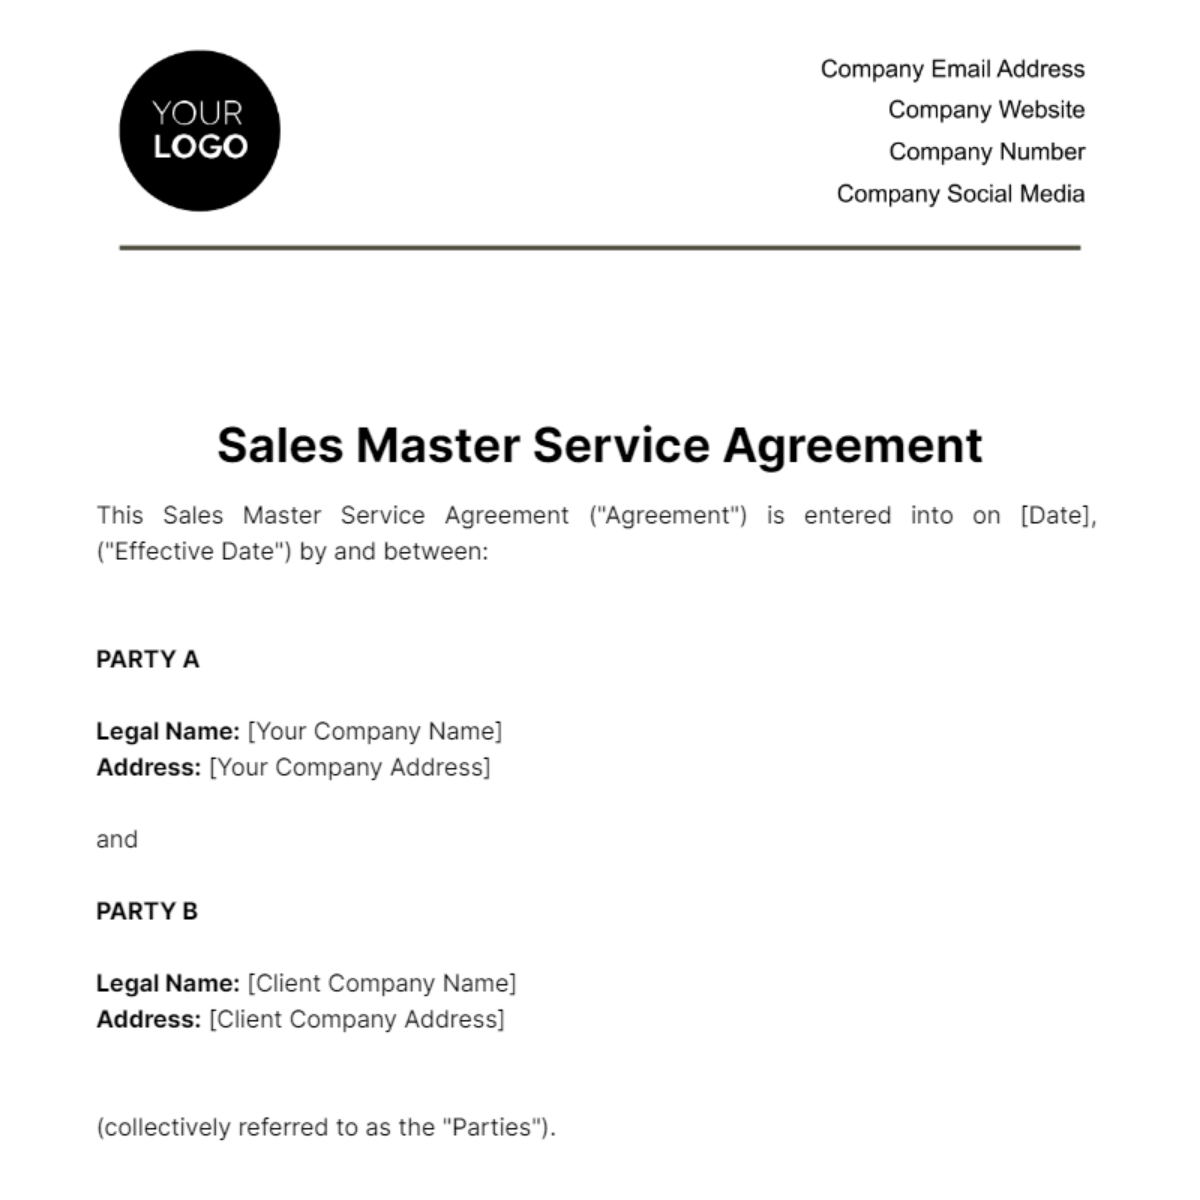 Sales Master Service Agreement Template